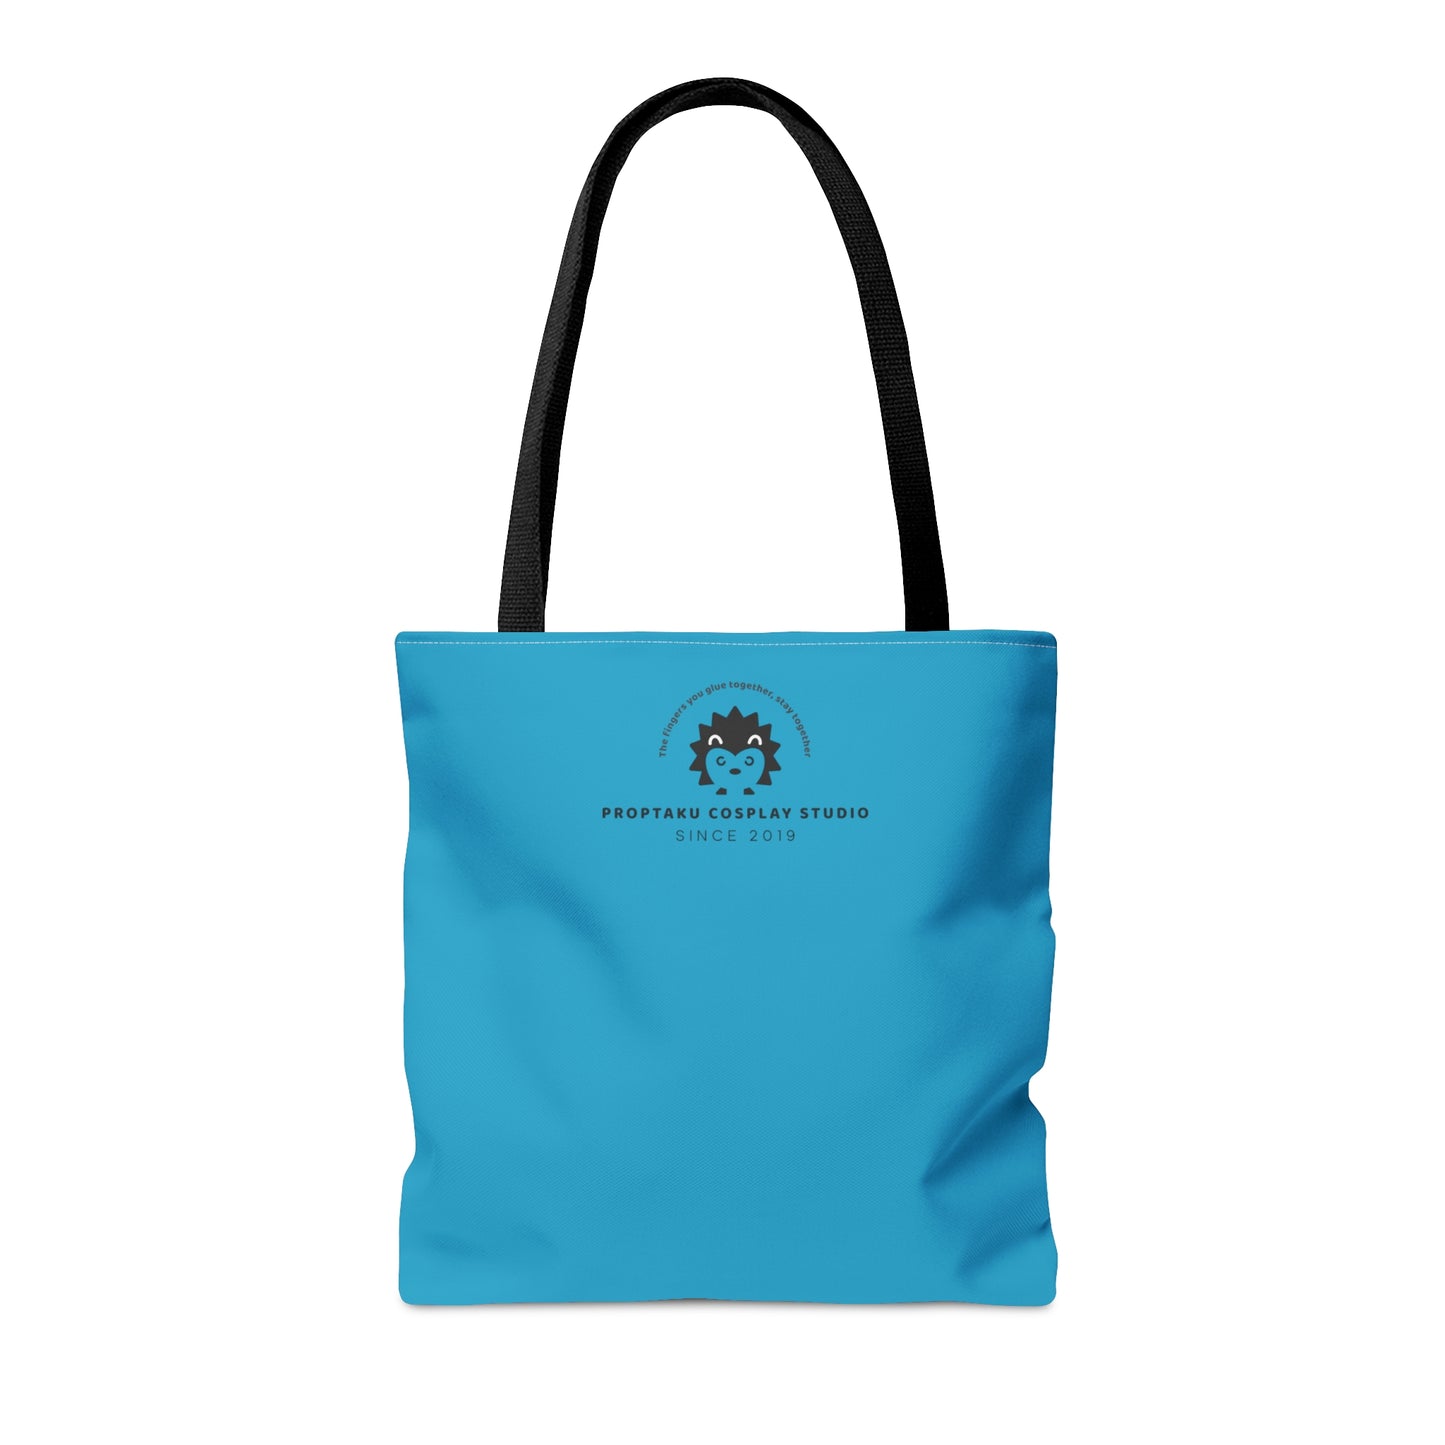 After-Con "Take Off Your Mask" Tote Bag